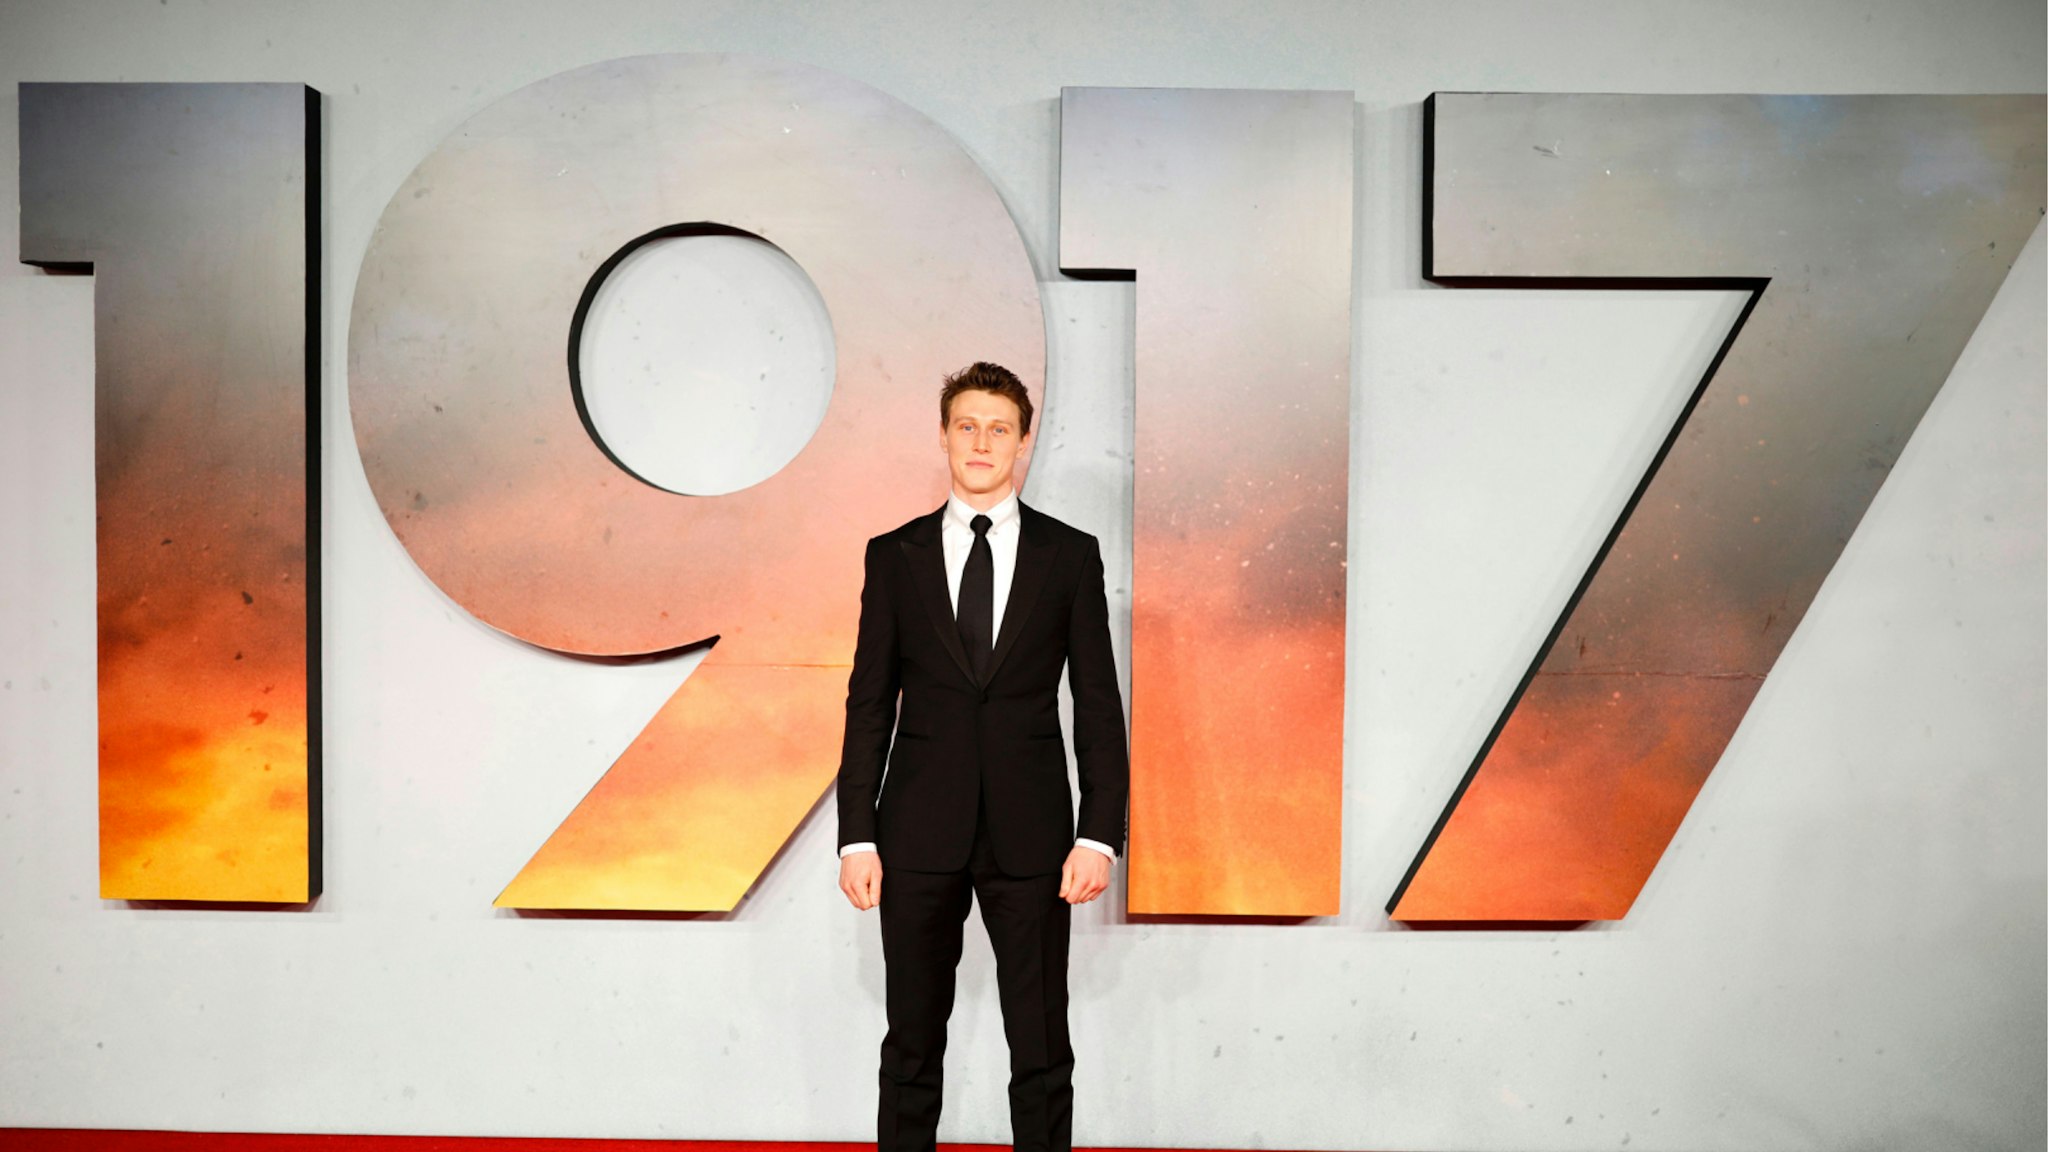 British actor George MacKay poses on the red carpet as he arrives to attend the World premiere and Royal Film Performance of the film "1917" in London on December 4, 2019, in support of the film and TV charity.